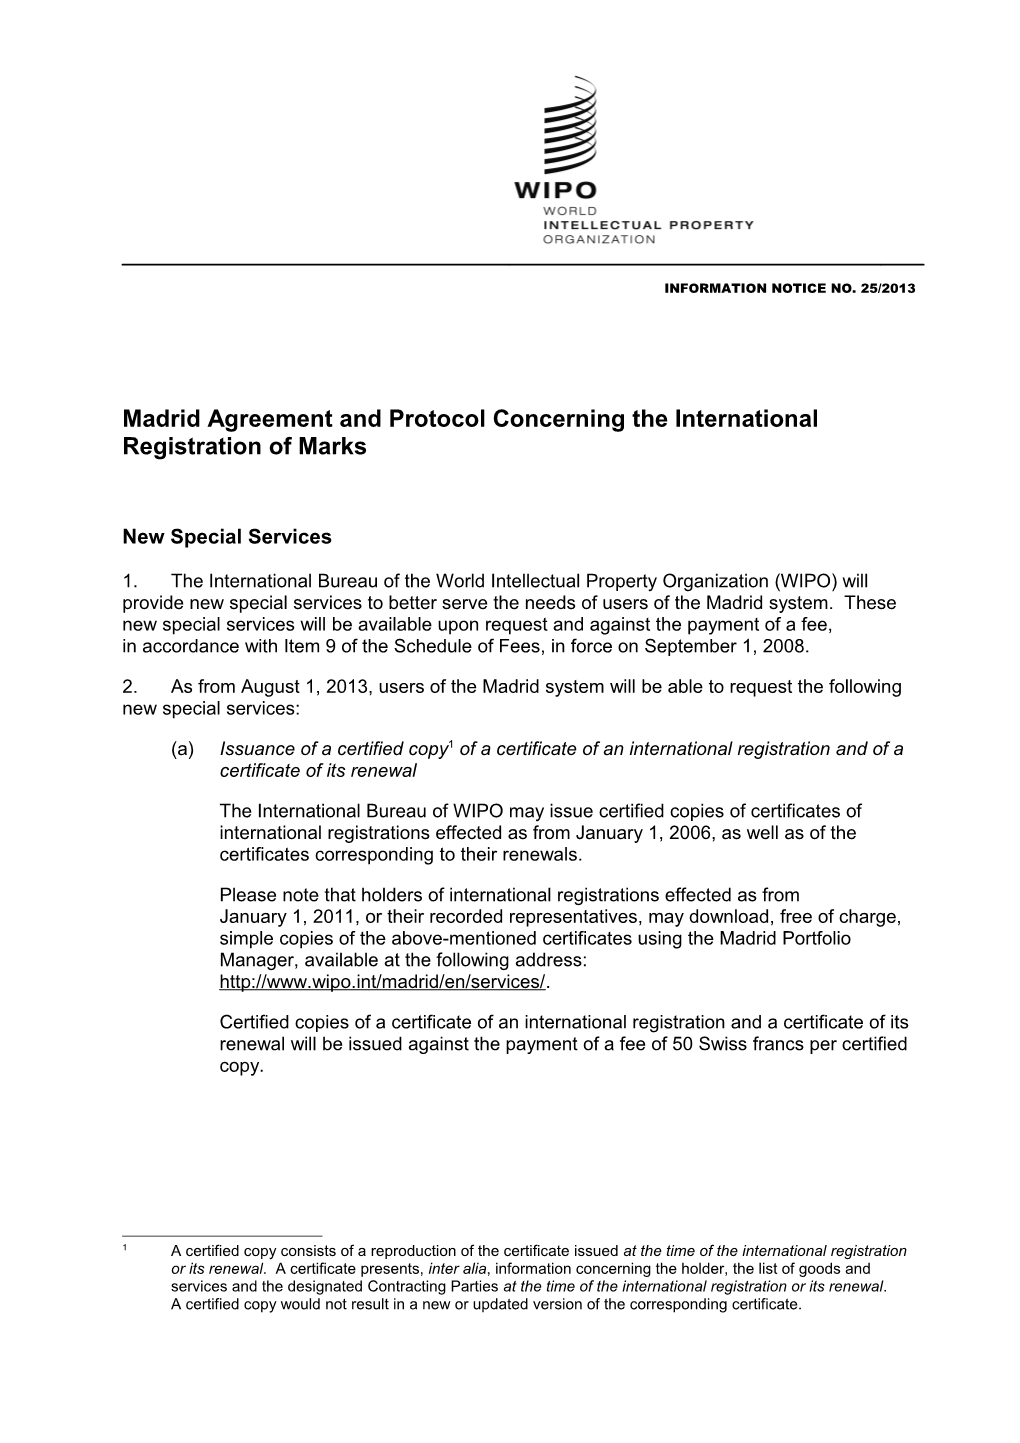 Madrid Agreement and Protocol Concerning the International Registration of Marks